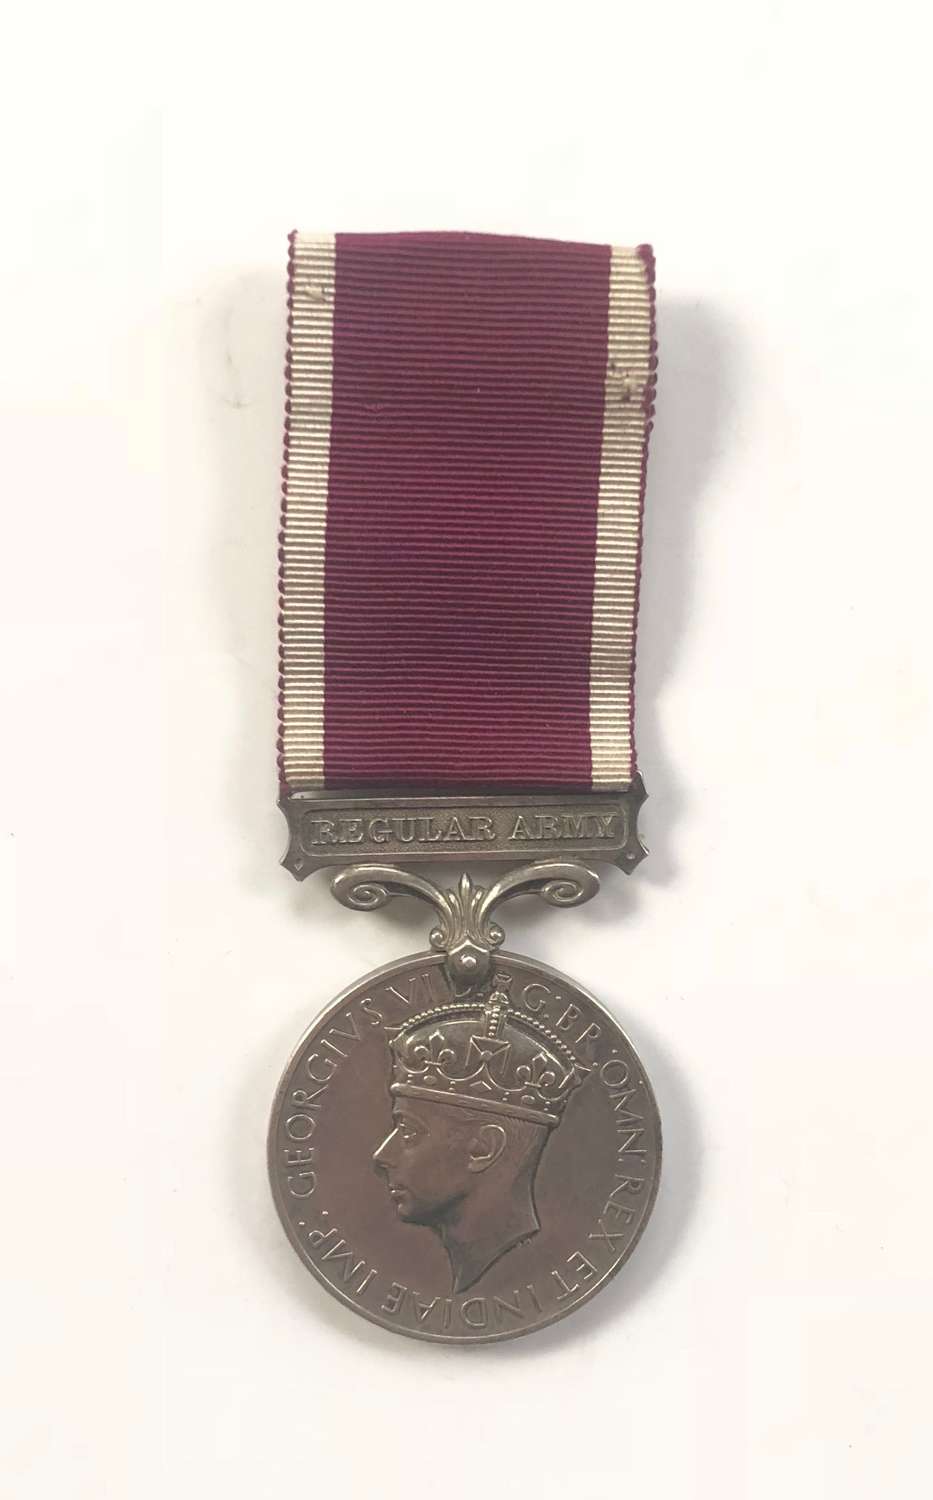 16/5 Lancers Regular Army Long Service & Good Conduct Medal.